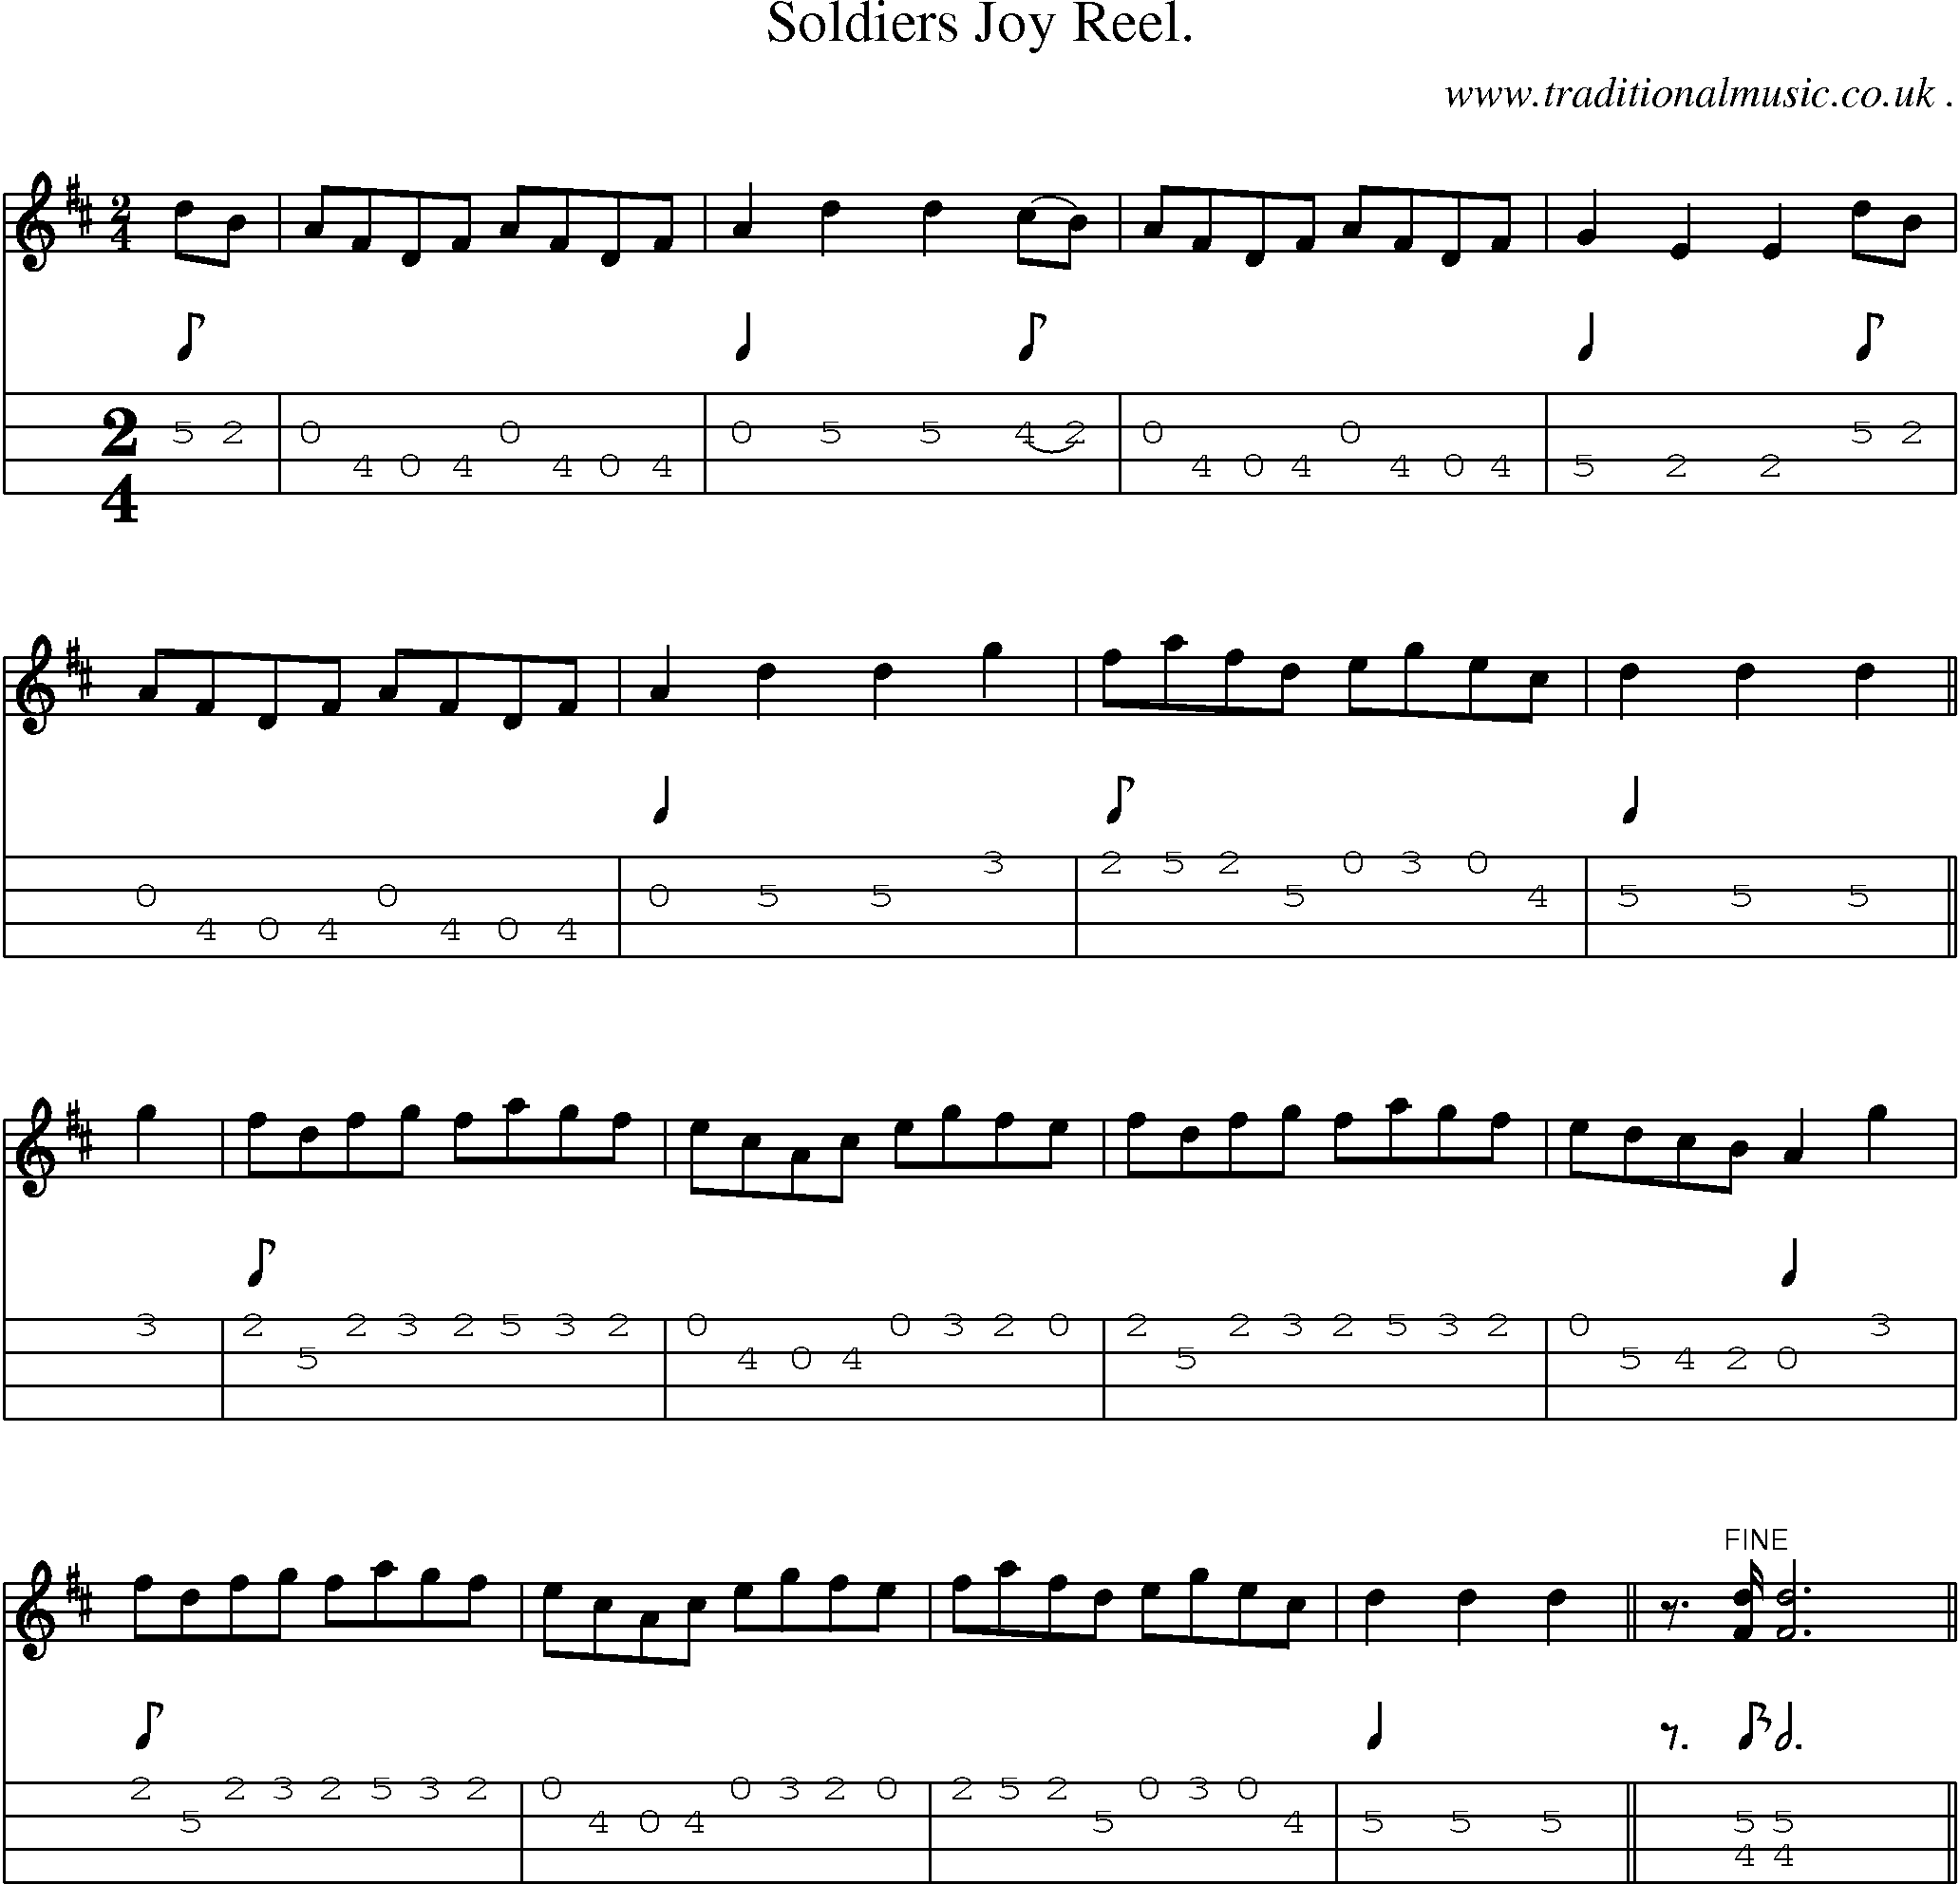 Sheet-Music and Mandolin Tabs for Soldiers Joy Reel